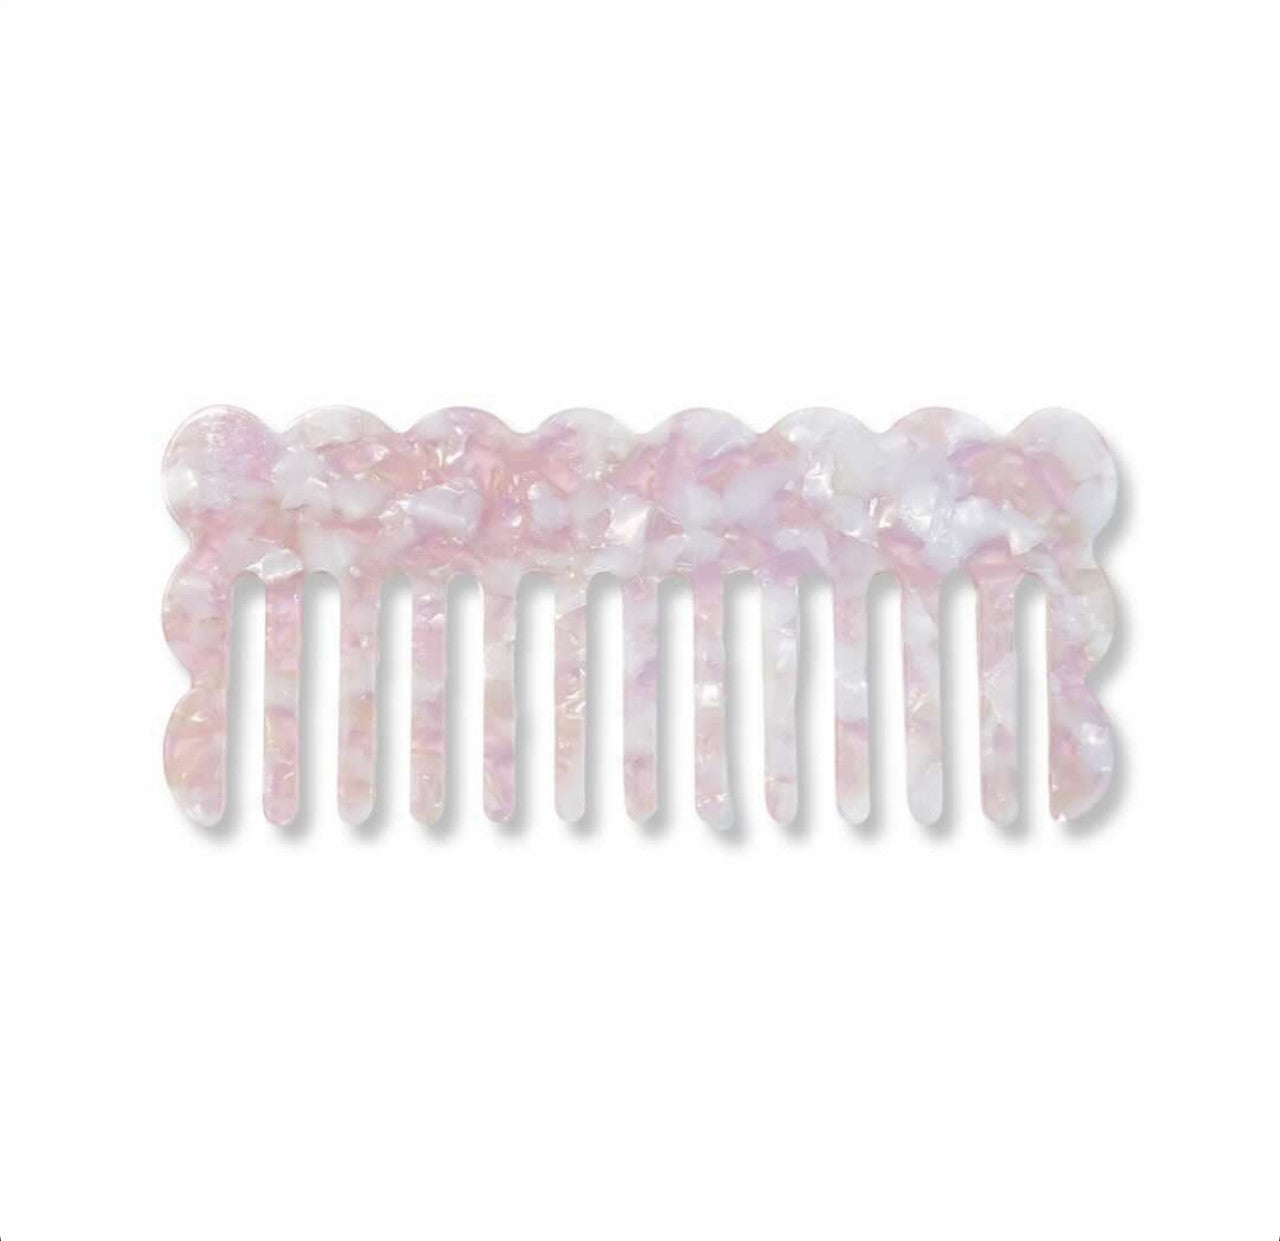 The Shower Comb